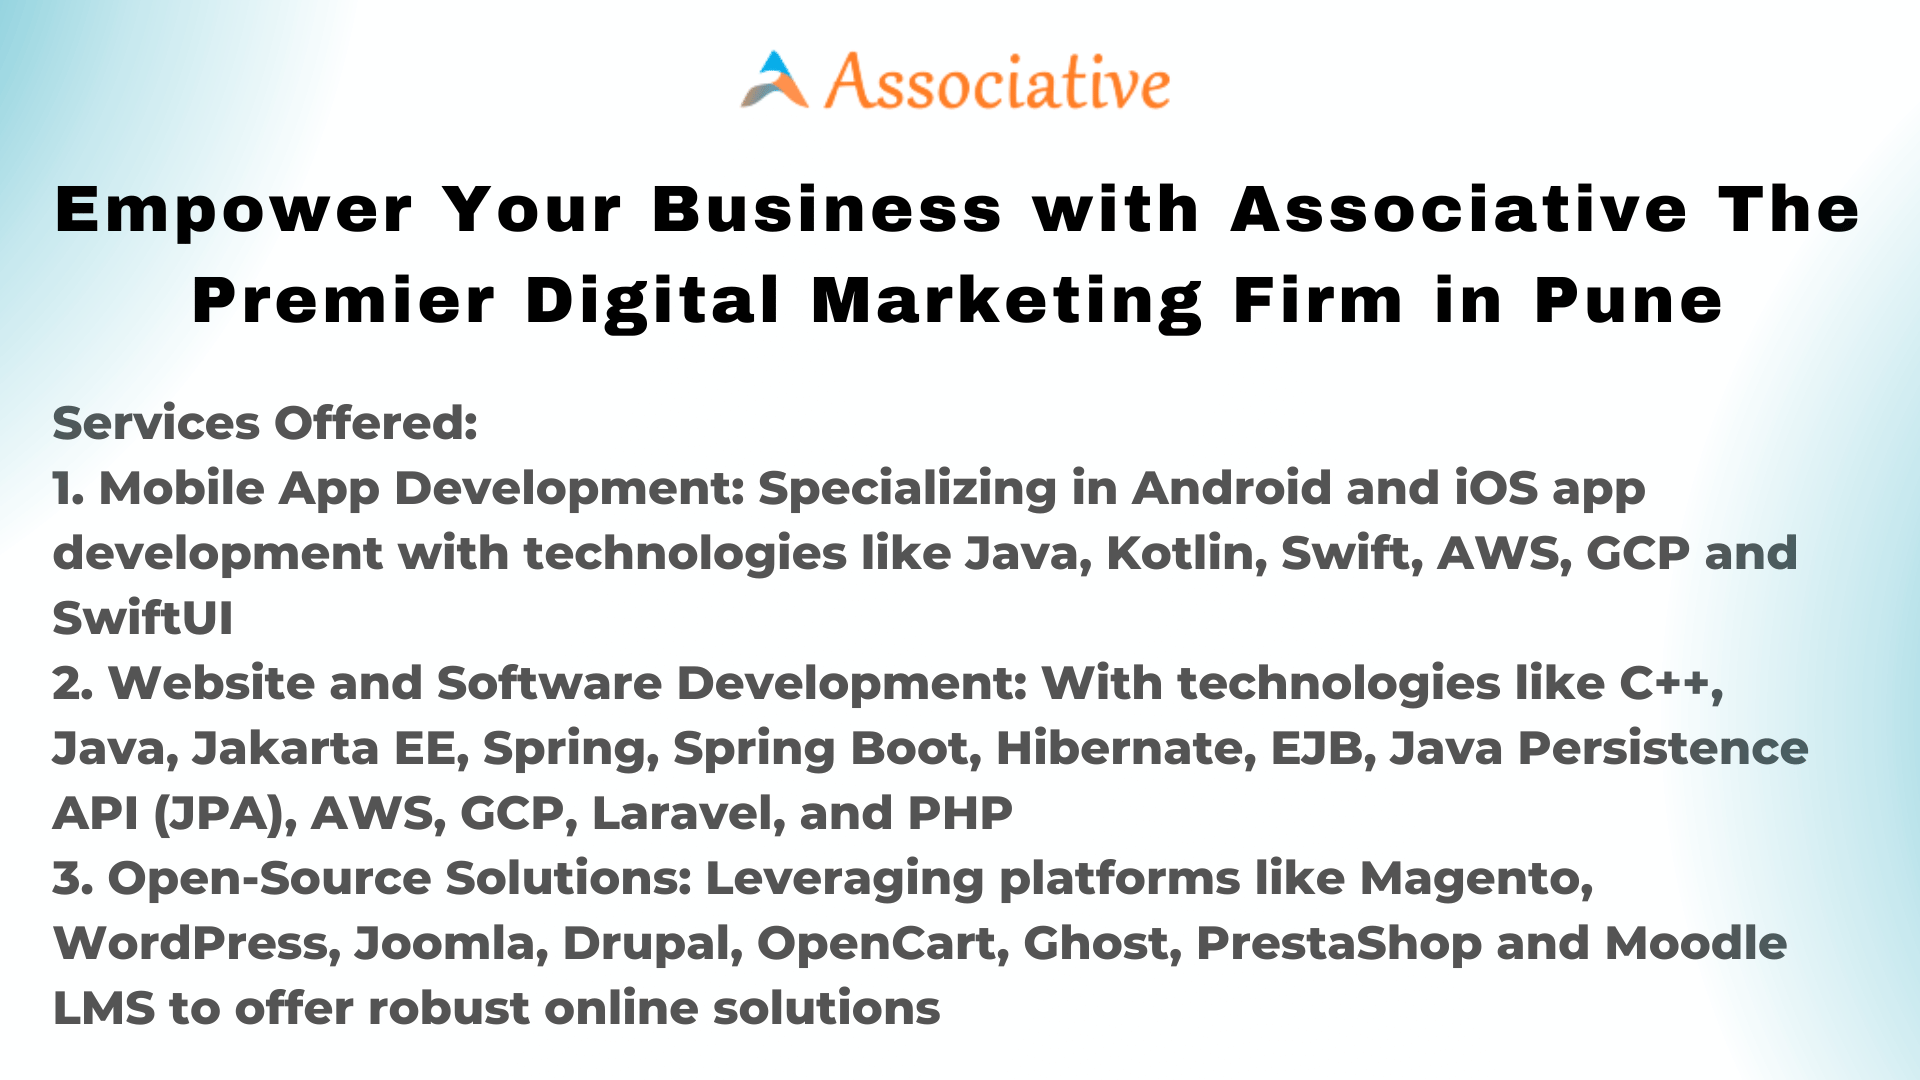 Empower Your Business with Associative The Premier Digital Marketing Firm in Pune